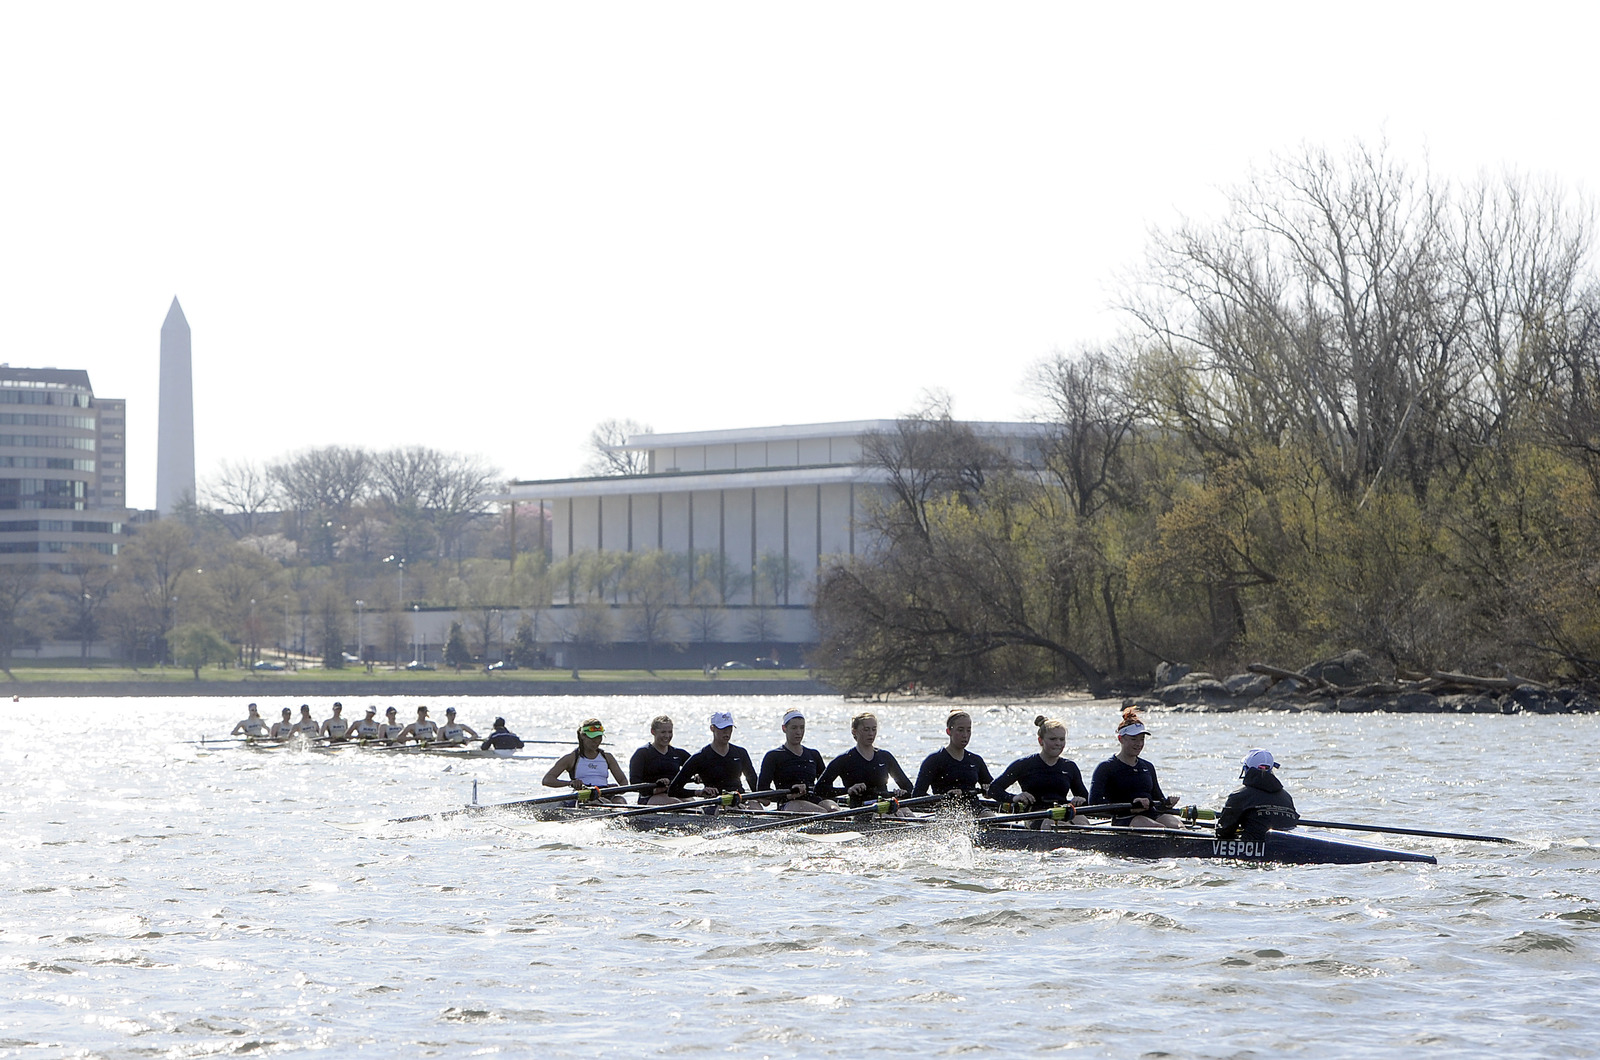 The $200,000 seed gift from GW Rowing alumnus Dave Wilson, SEAS ’87, will support racing shells, scholarships, and team travel